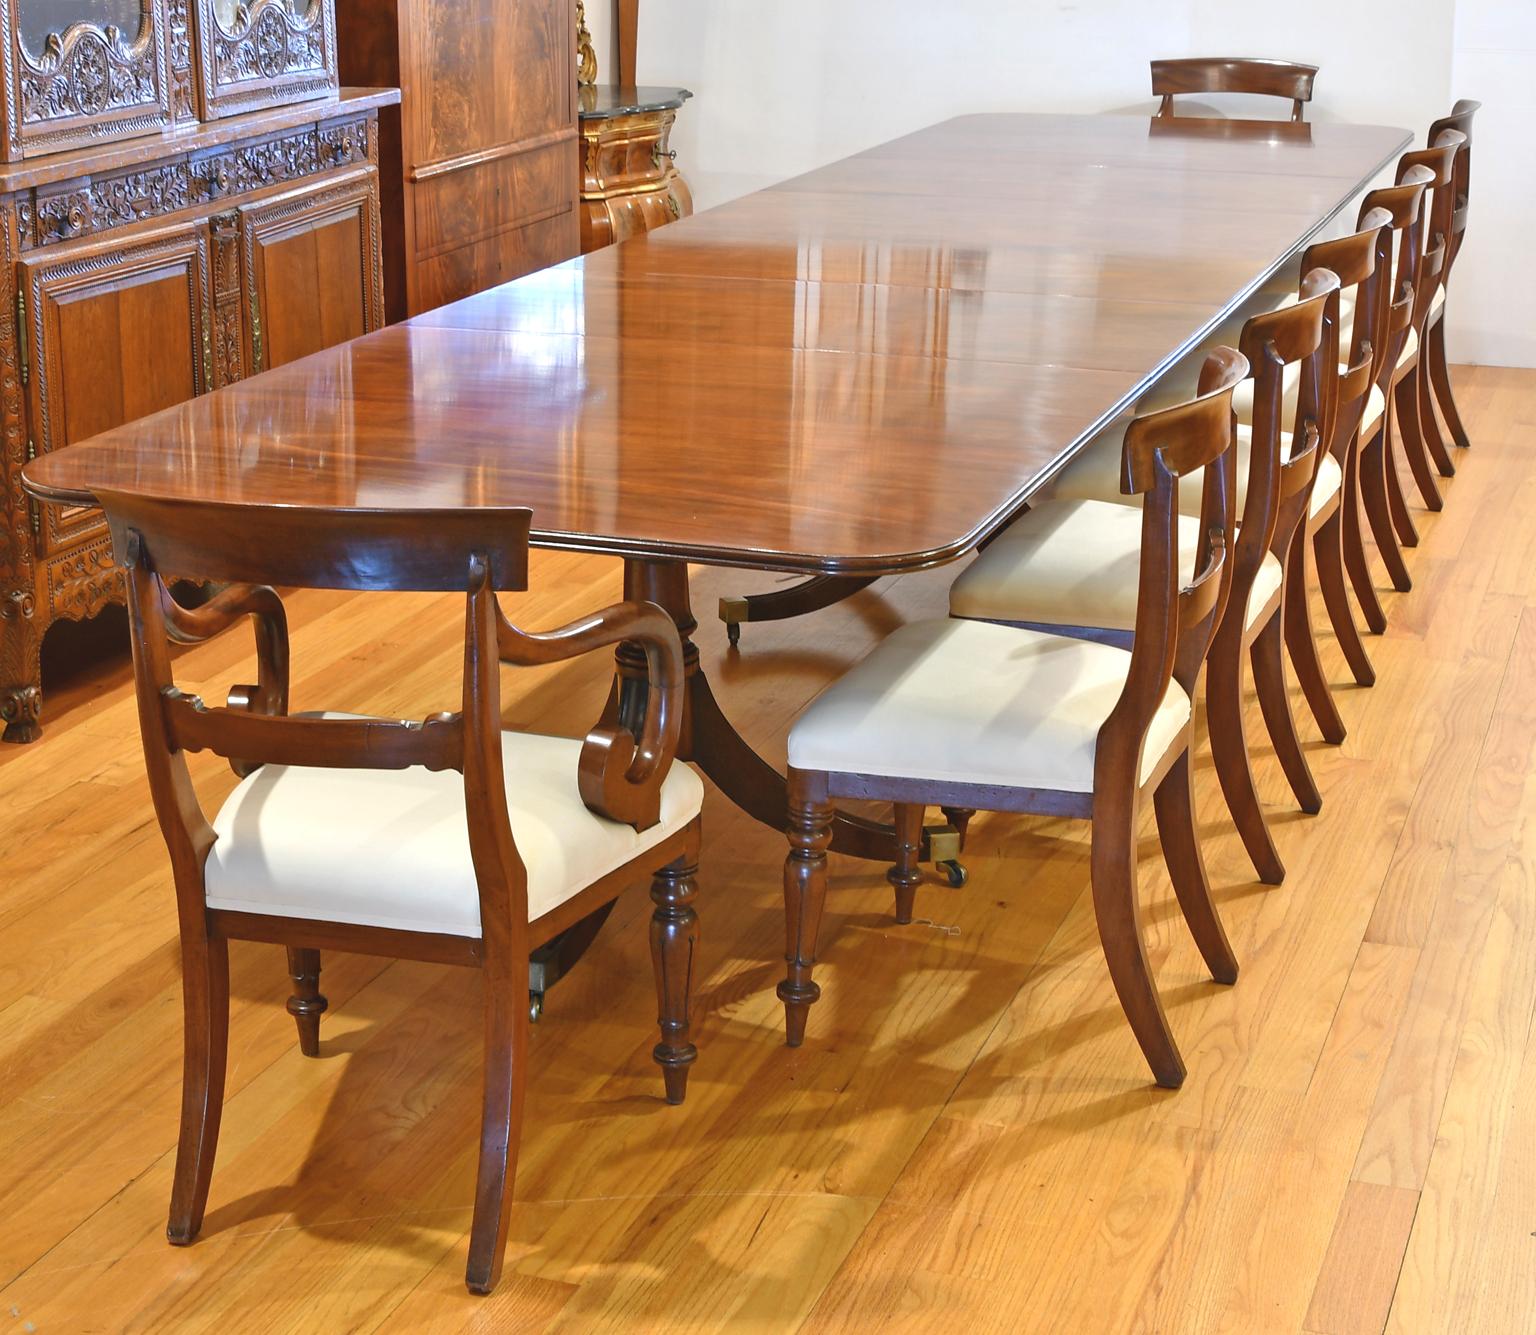 Polished 15' Antique English Banquet Dining Table in Mahogany w/ 3 Pedestals & 2 Leaves